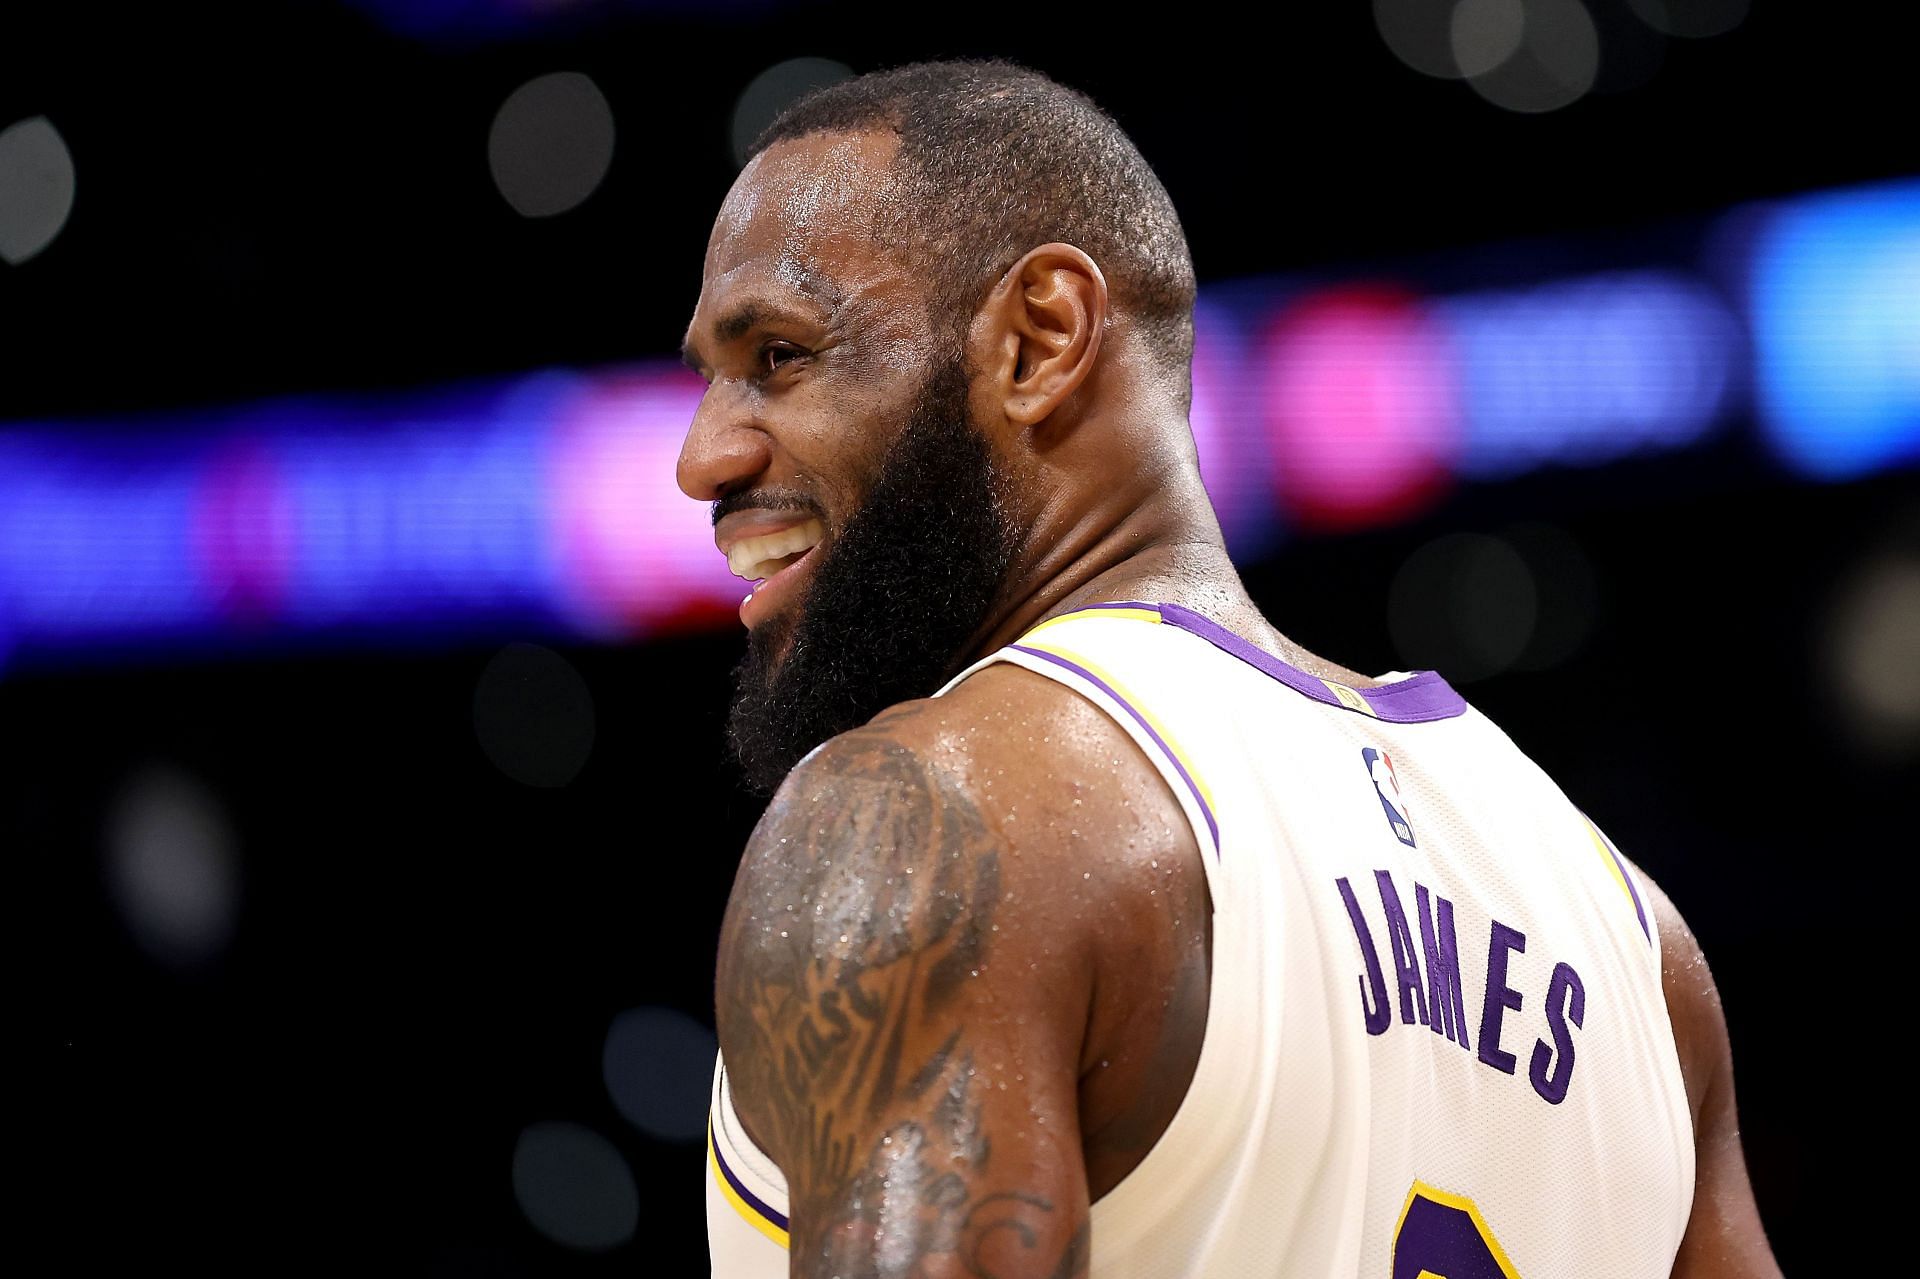 Report: LeBron James questionable for Wednesday's tilt vs. Houston Rockets  - Lakers Daily